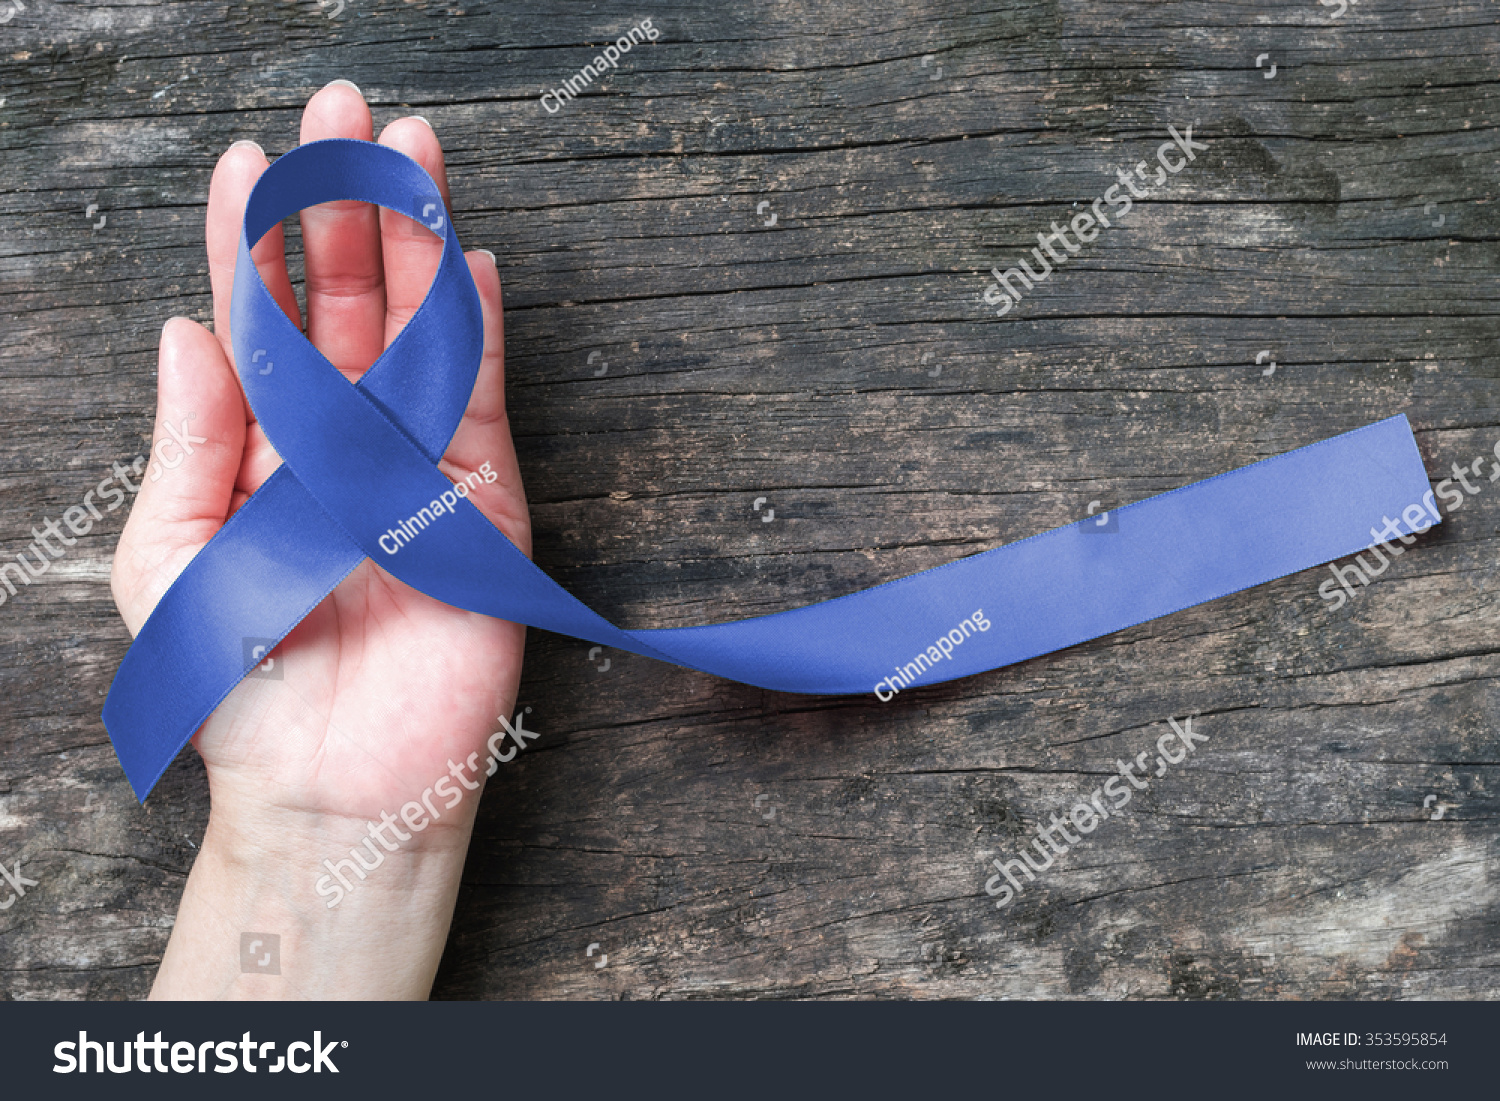 Colorectal Colon cancer, Acute Respiratory Distress Syndrome (ARDS), Juvenile Arthritis and Tuberous Sclerosis, Guillain Barre syndrome awareness with dark blue ribbon on helping hand aged background #353595854